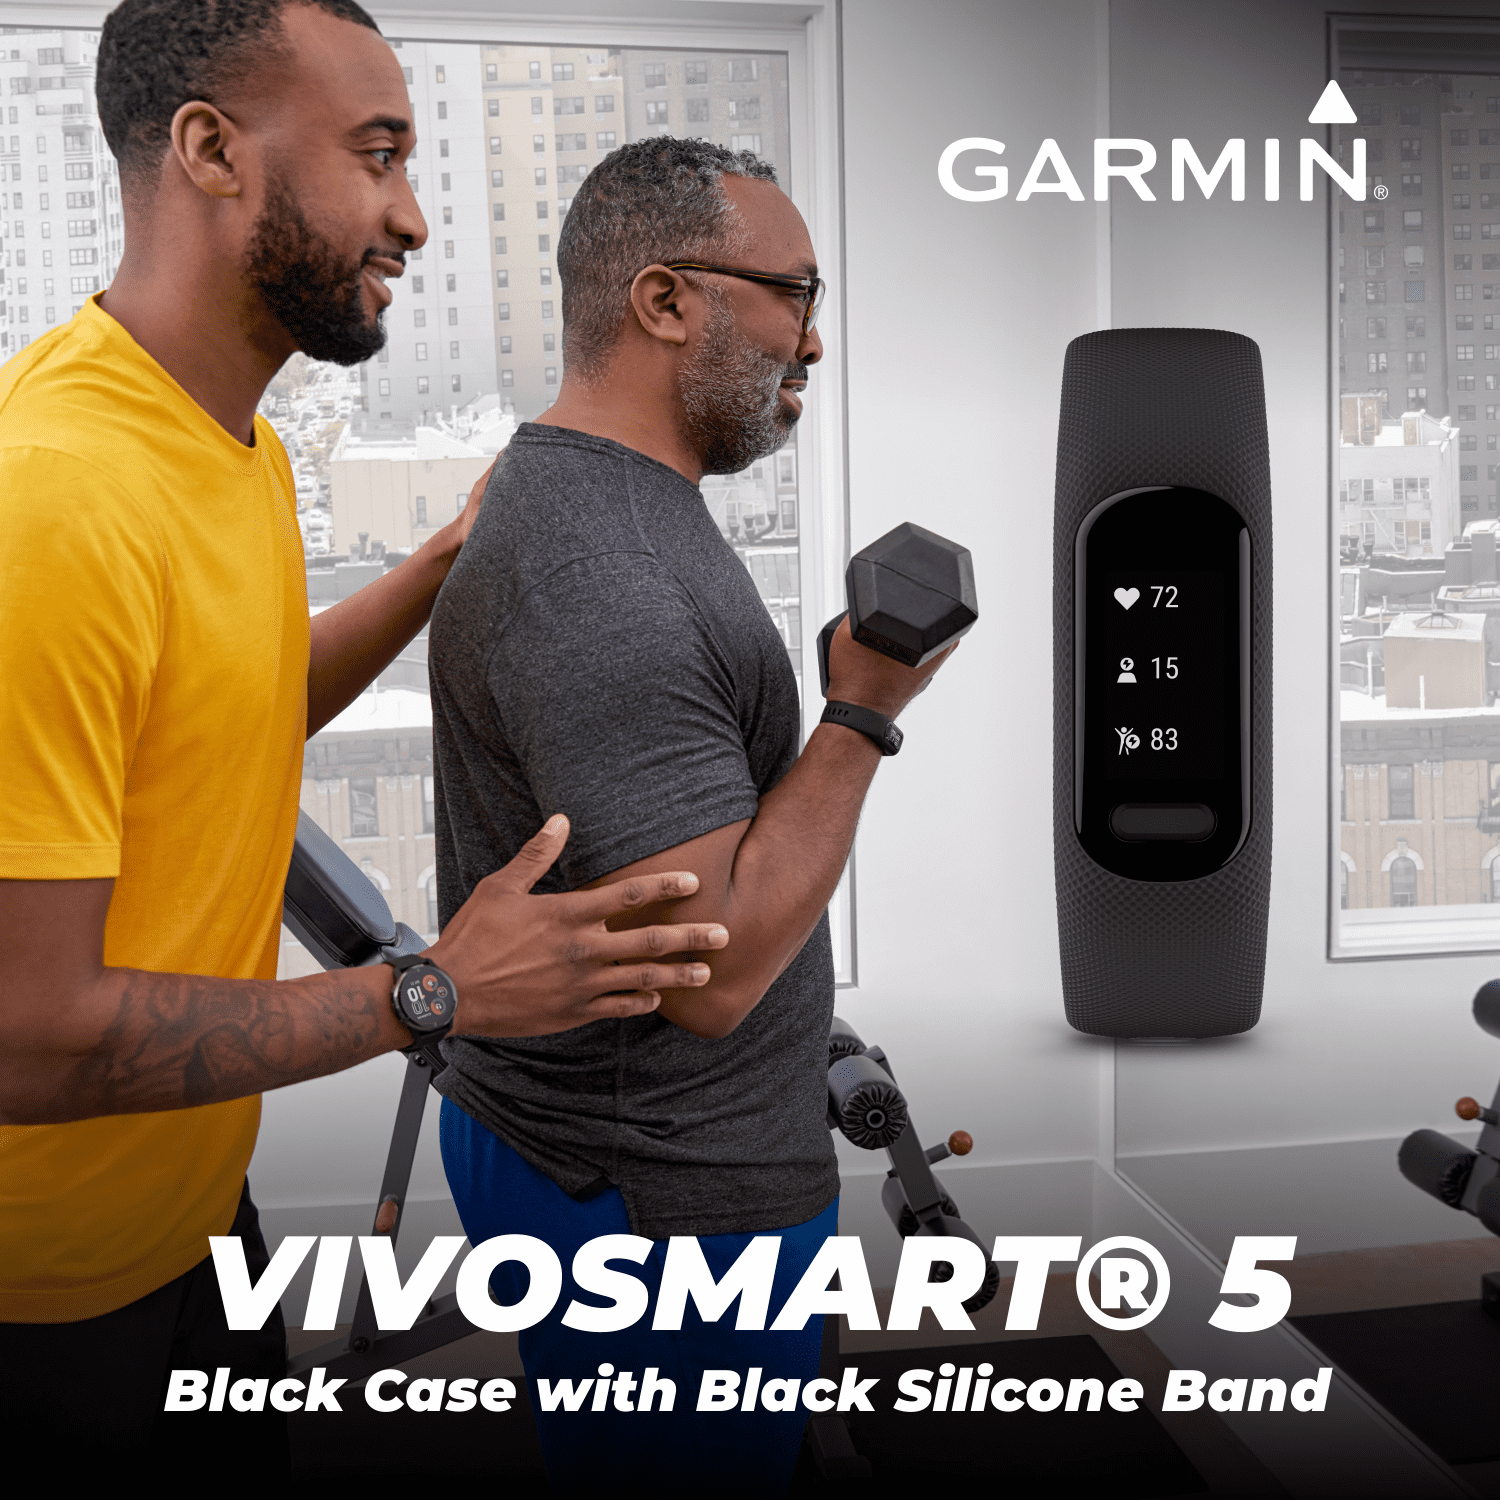 5 Smart Fitness Tracker, Black Case with Black Silicone with Wearable4U Power Bank Bundle - Walmart.com